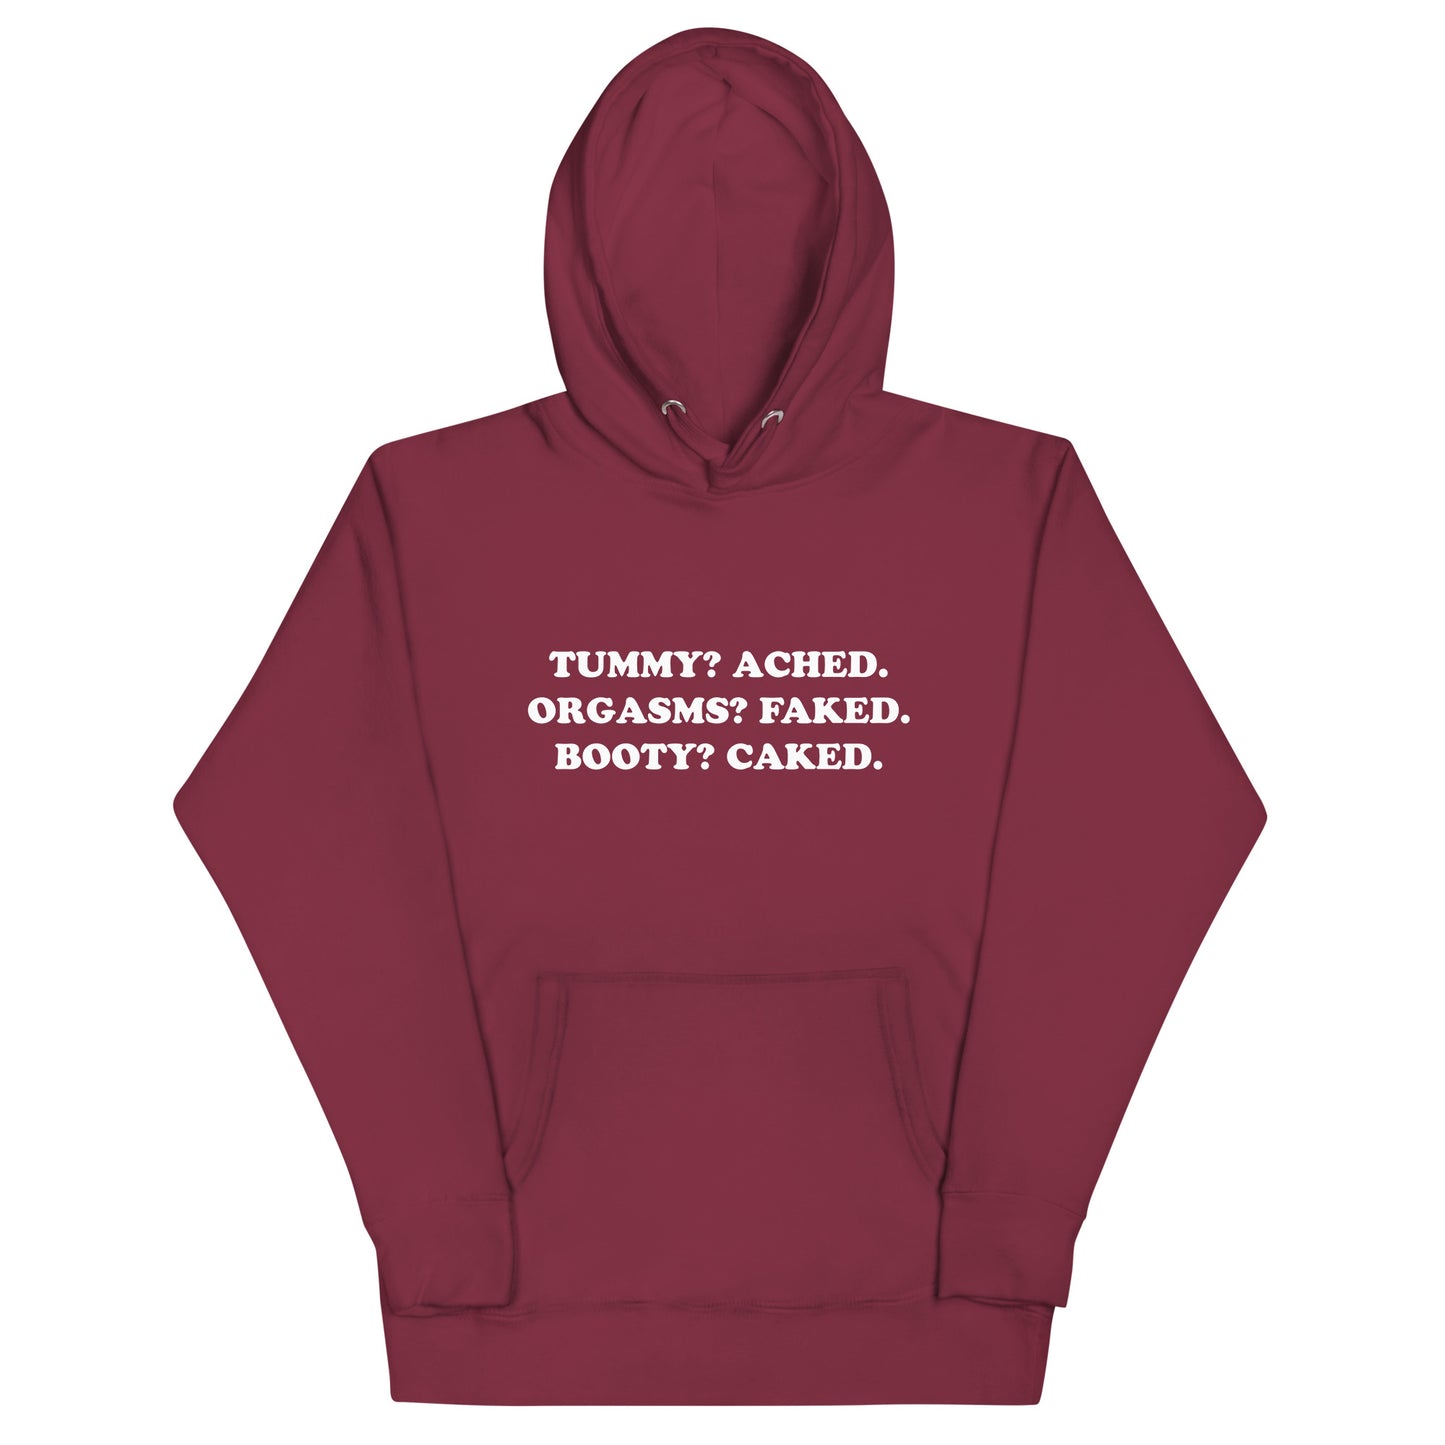 Tummy Ached Booty Caked Unisex Hoodie